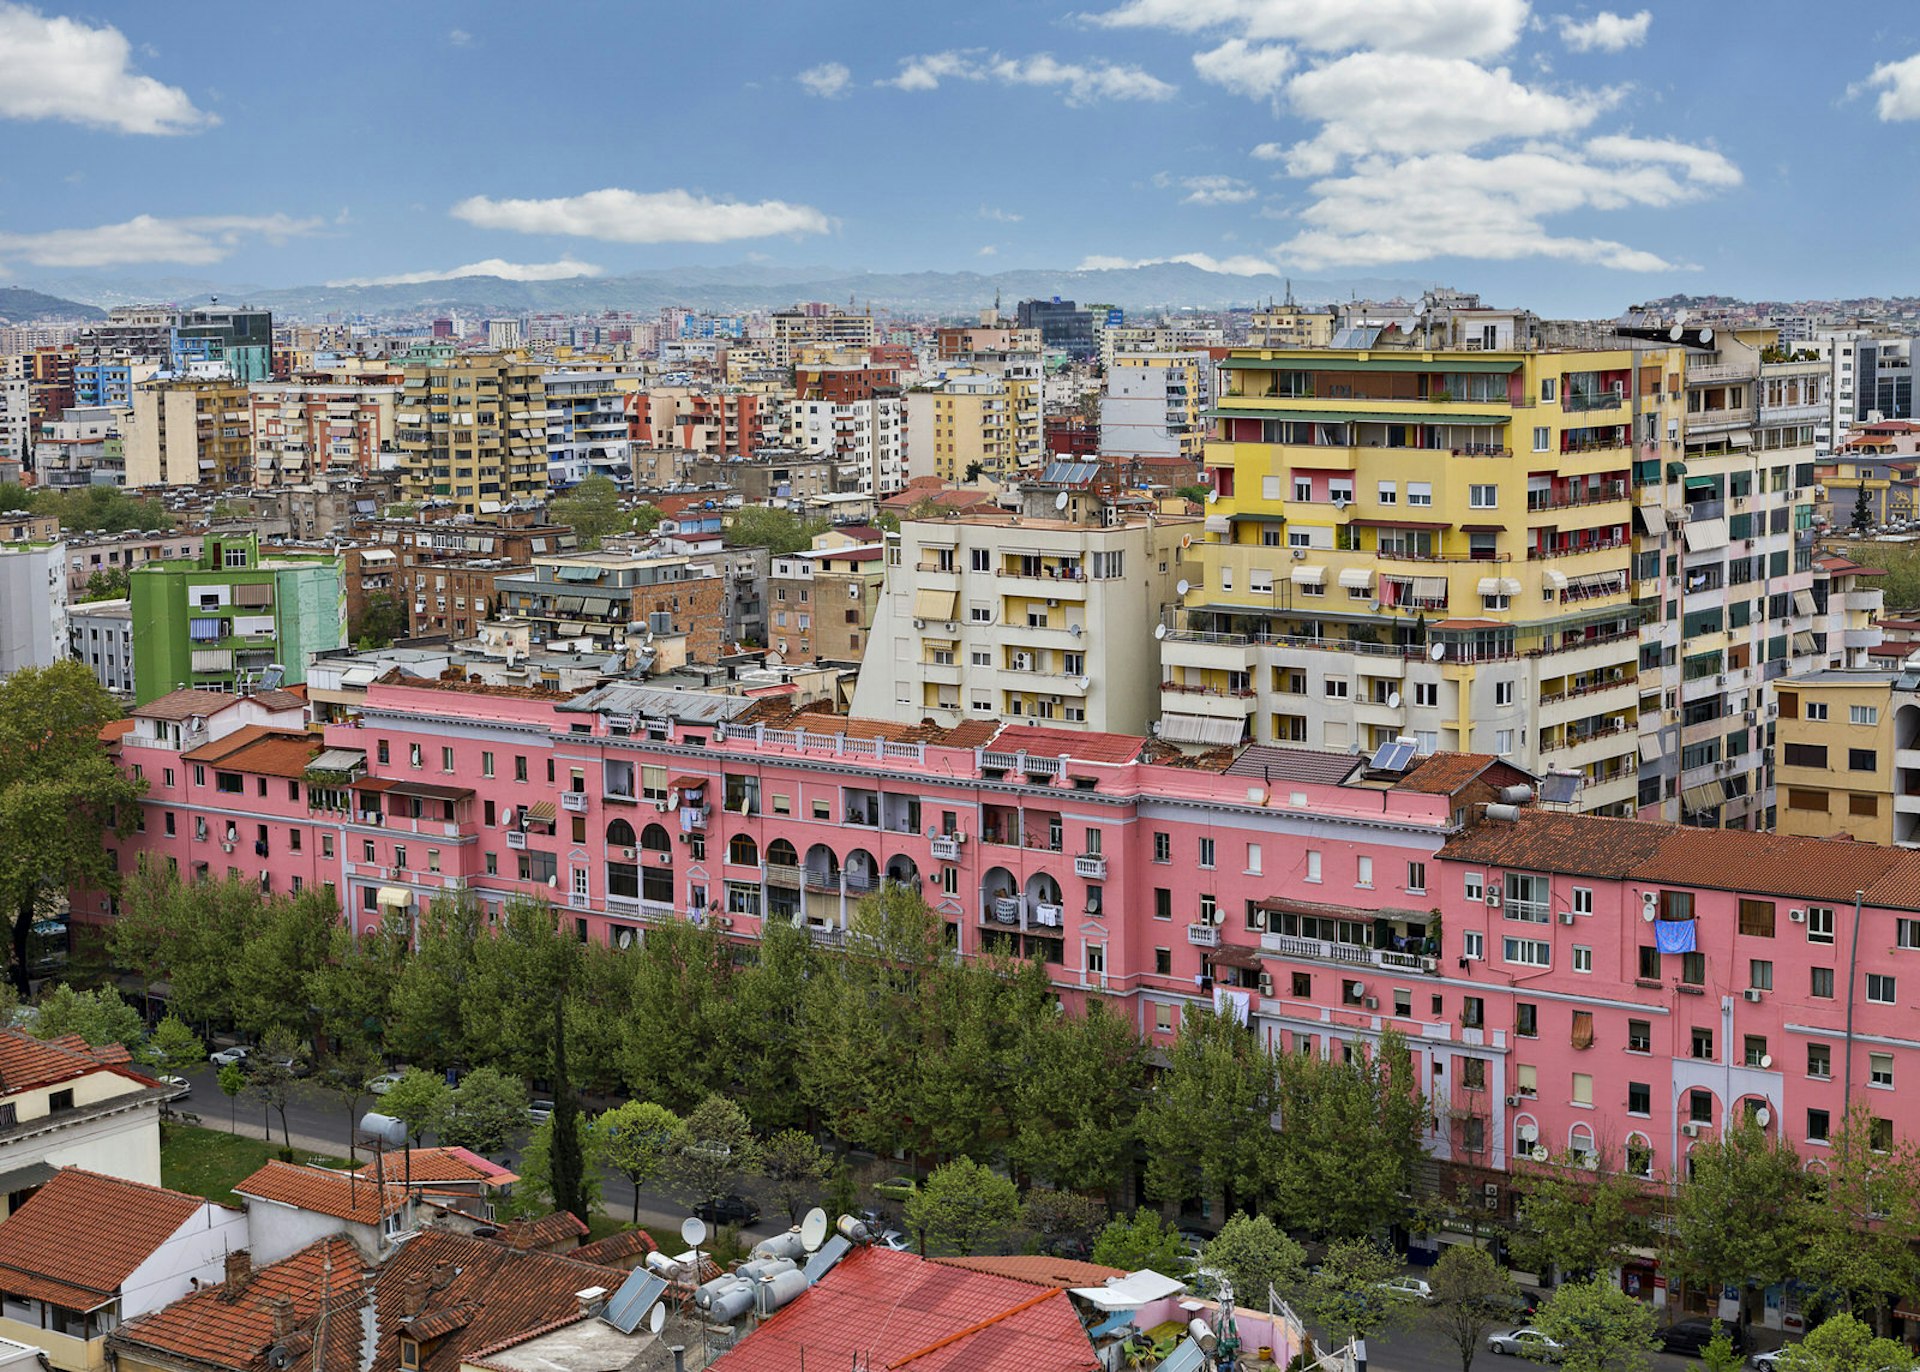 Aerial view of colourful apartment blocks in Tirana, Albania © Ozbalci / Getty Images